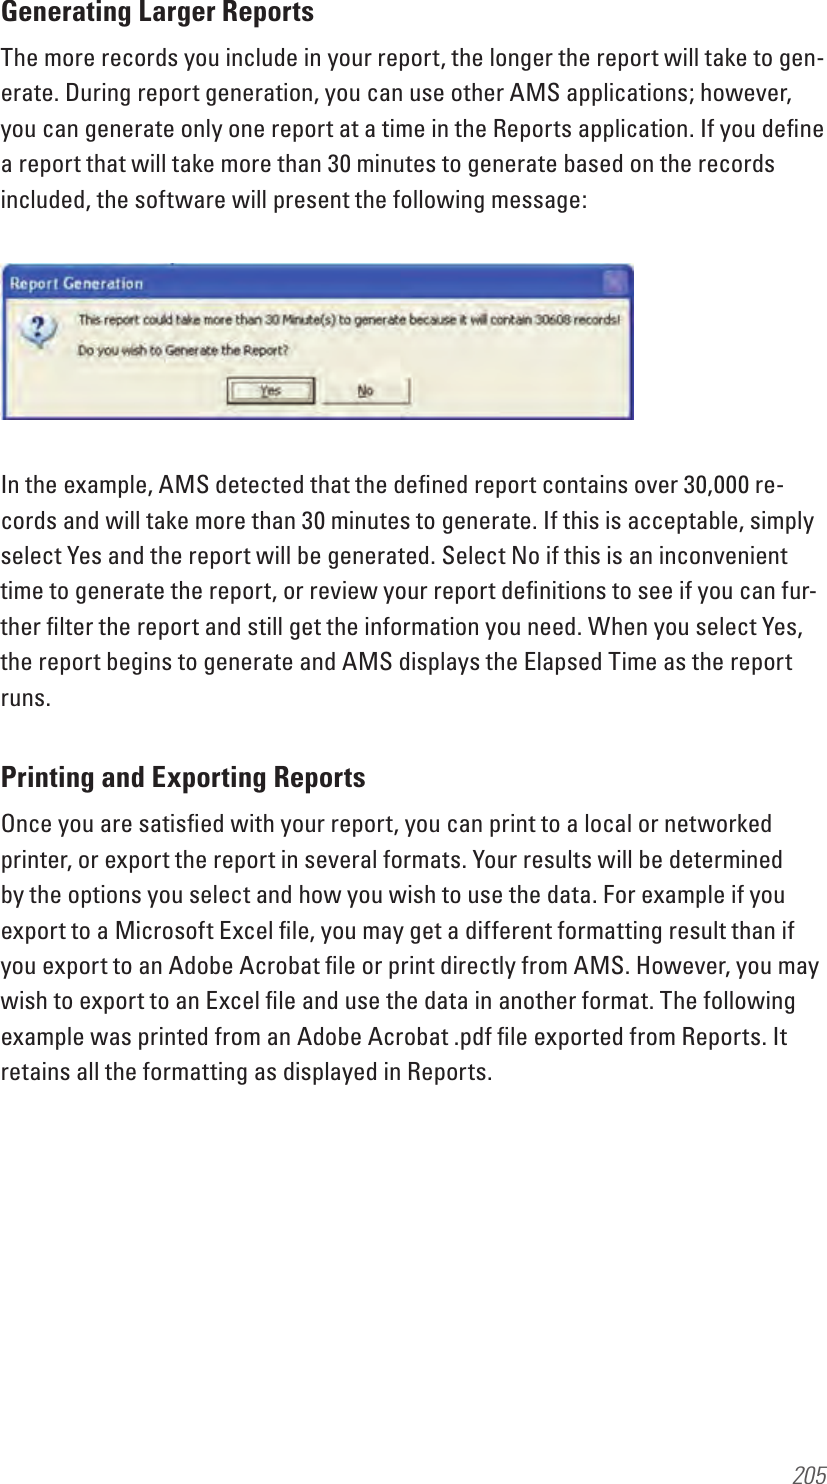 205Generating Larger ReportsThe more records you include in your report, the longer the report will take to gen-erate. During report generation, you can use other AMS applications; however, you can generate only one report at a time in the Reports application. If you deﬁne a report that will take more than 30 minutes to generate based on the records included, the software will present the following message:In the example, AMS detected that the deﬁned report contains over 30,000 re-cords and will take more than 30 minutes to generate. If this is acceptable, simply select Yes and the report will be generated. Select No if this is an inconvenient time to generate the report, or review your report deﬁnitions to see if you can fur-ther ﬁlter the report and still get the information you need. When you select Yes, the report begins to generate and AMS displays the Elapsed Time as the report runs.Printing and Exporting ReportsOnce you are satisﬁed with your report, you can print to a local or networked printer, or export the report in several formats. Your results will be determined by the options you select and how you wish to use the data. For example if you export to a Microsoft Excel ﬁle, you may get a different formatting result than if you export to an Adobe Acrobat ﬁle or print directly from AMS. However, you may wish to export to an Excel ﬁle and use the data in another format. The following example was printed from an Adobe Acrobat .pdf ﬁle exported from Reports. It retains all the formatting as displayed in Reports.